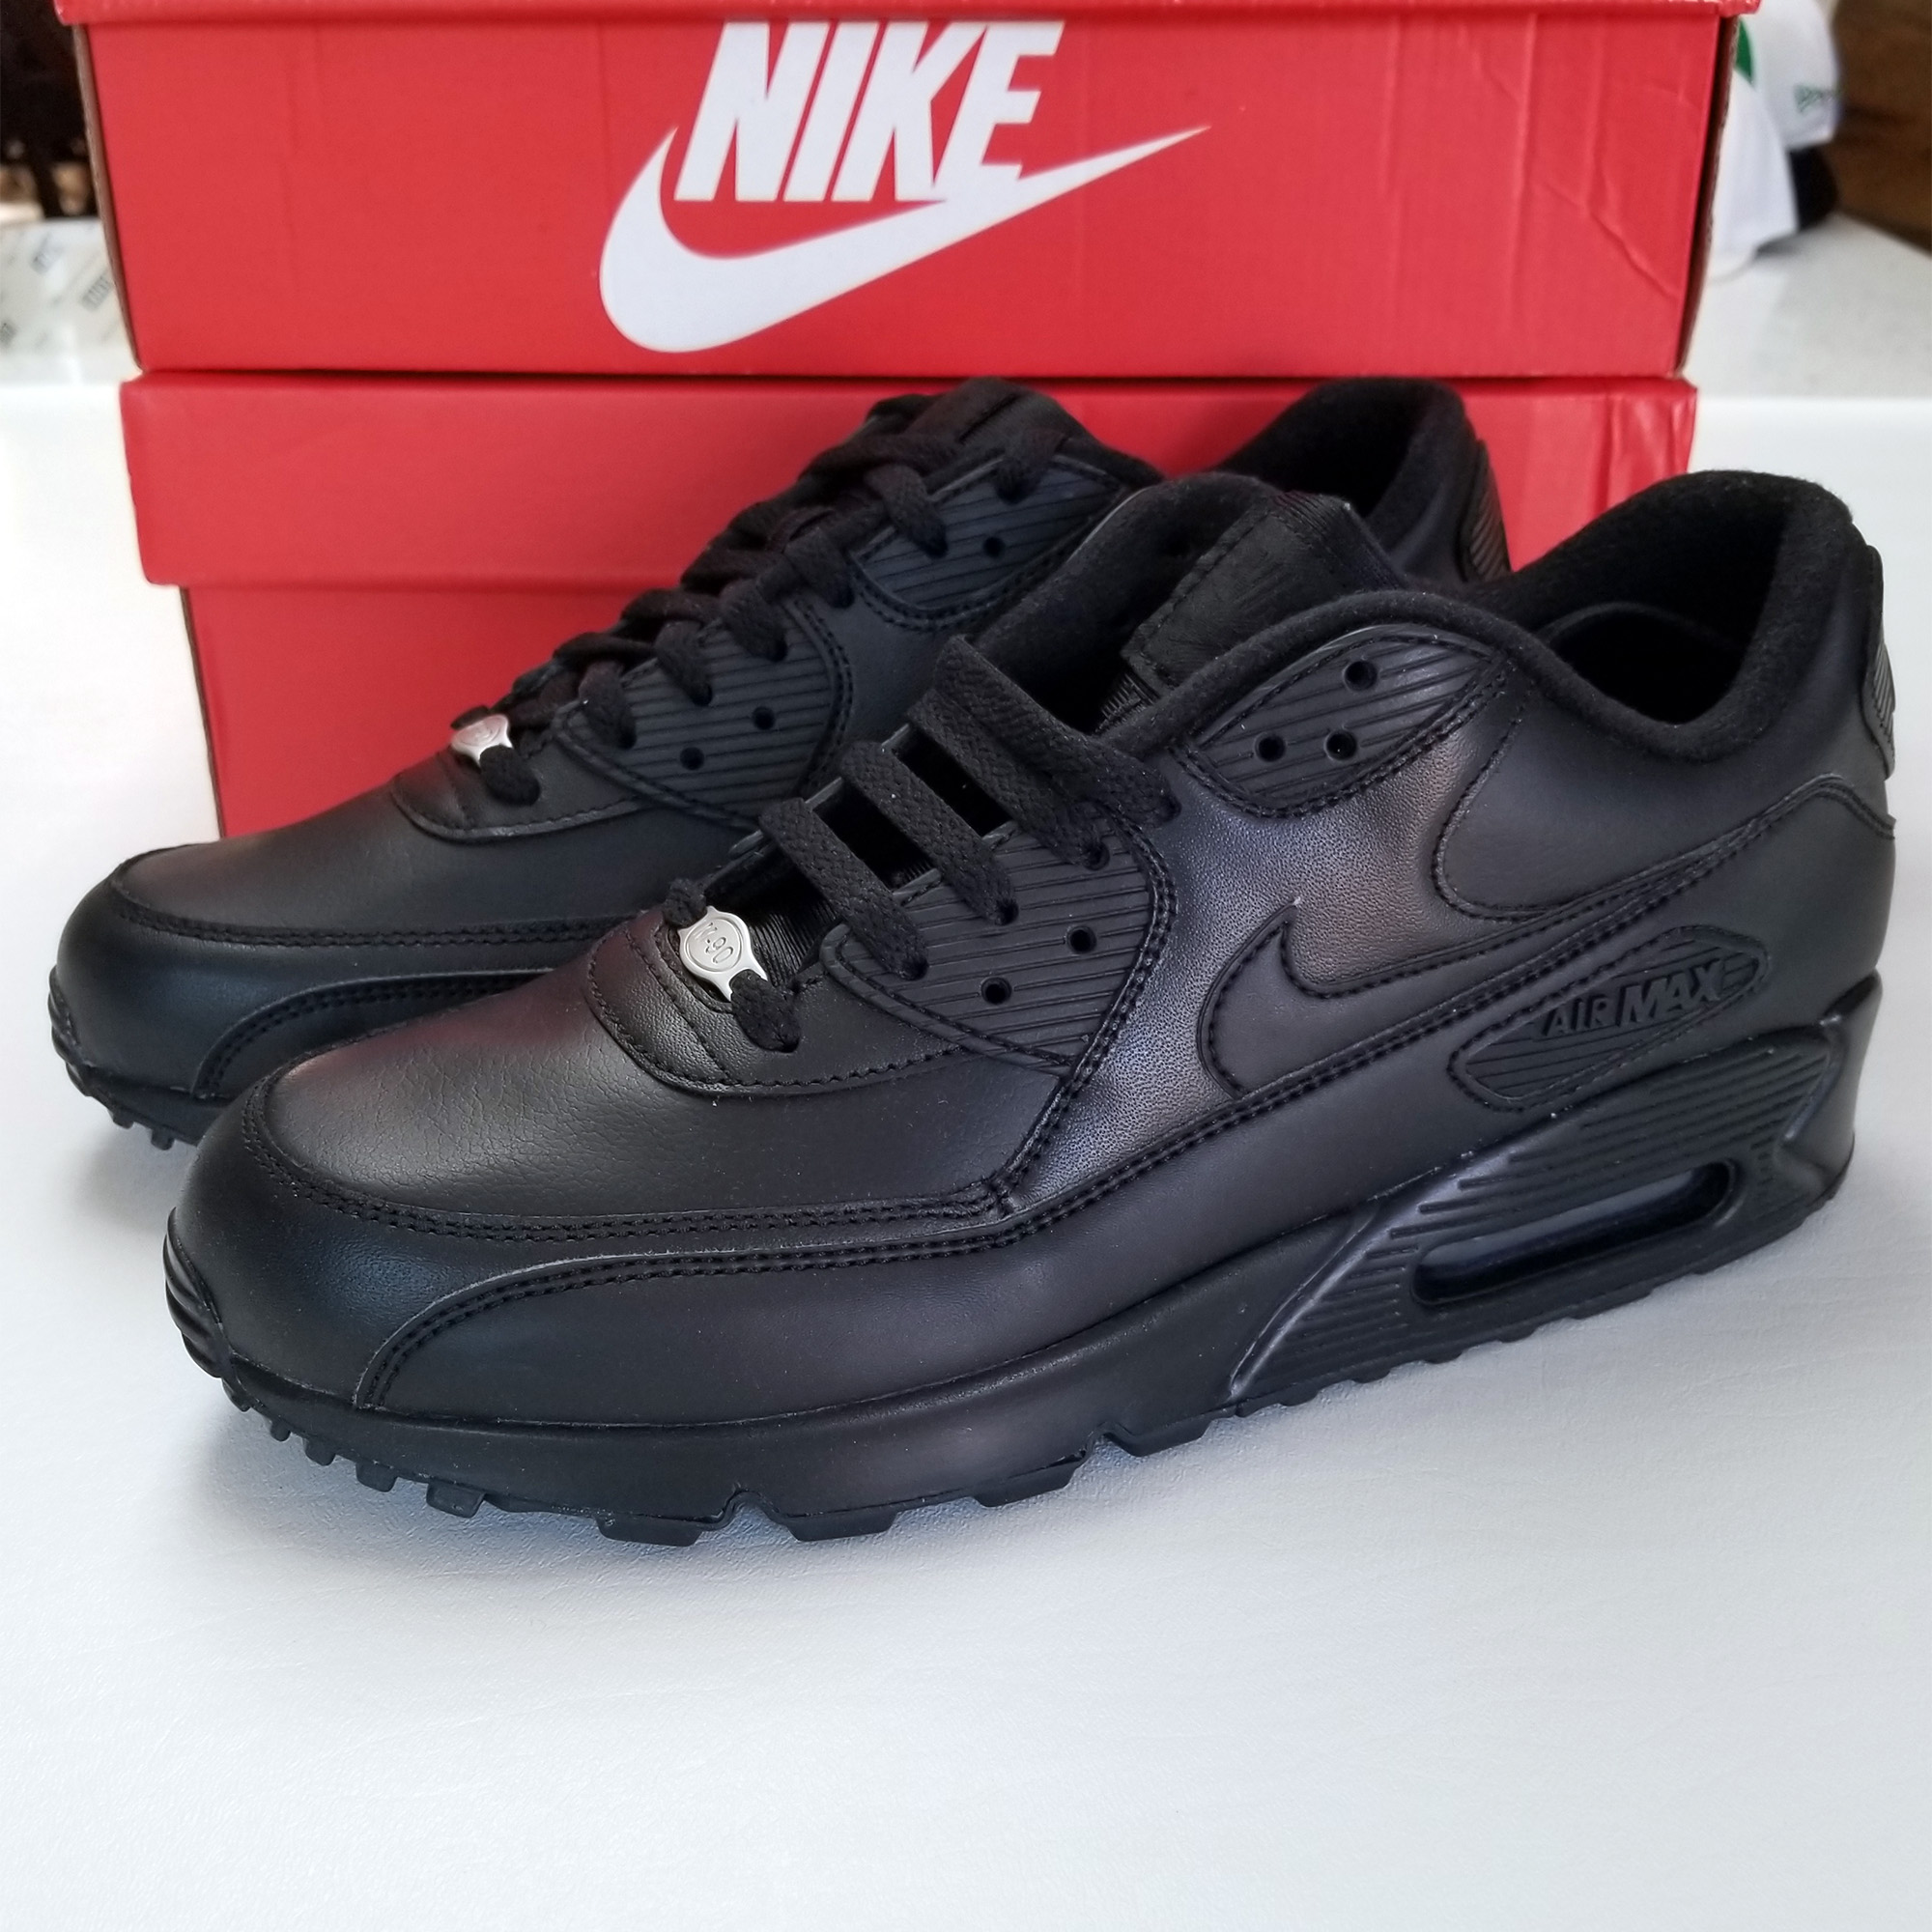 Men S Nike Air Max 90 Leather Triple Black Running Shoes 302519 001